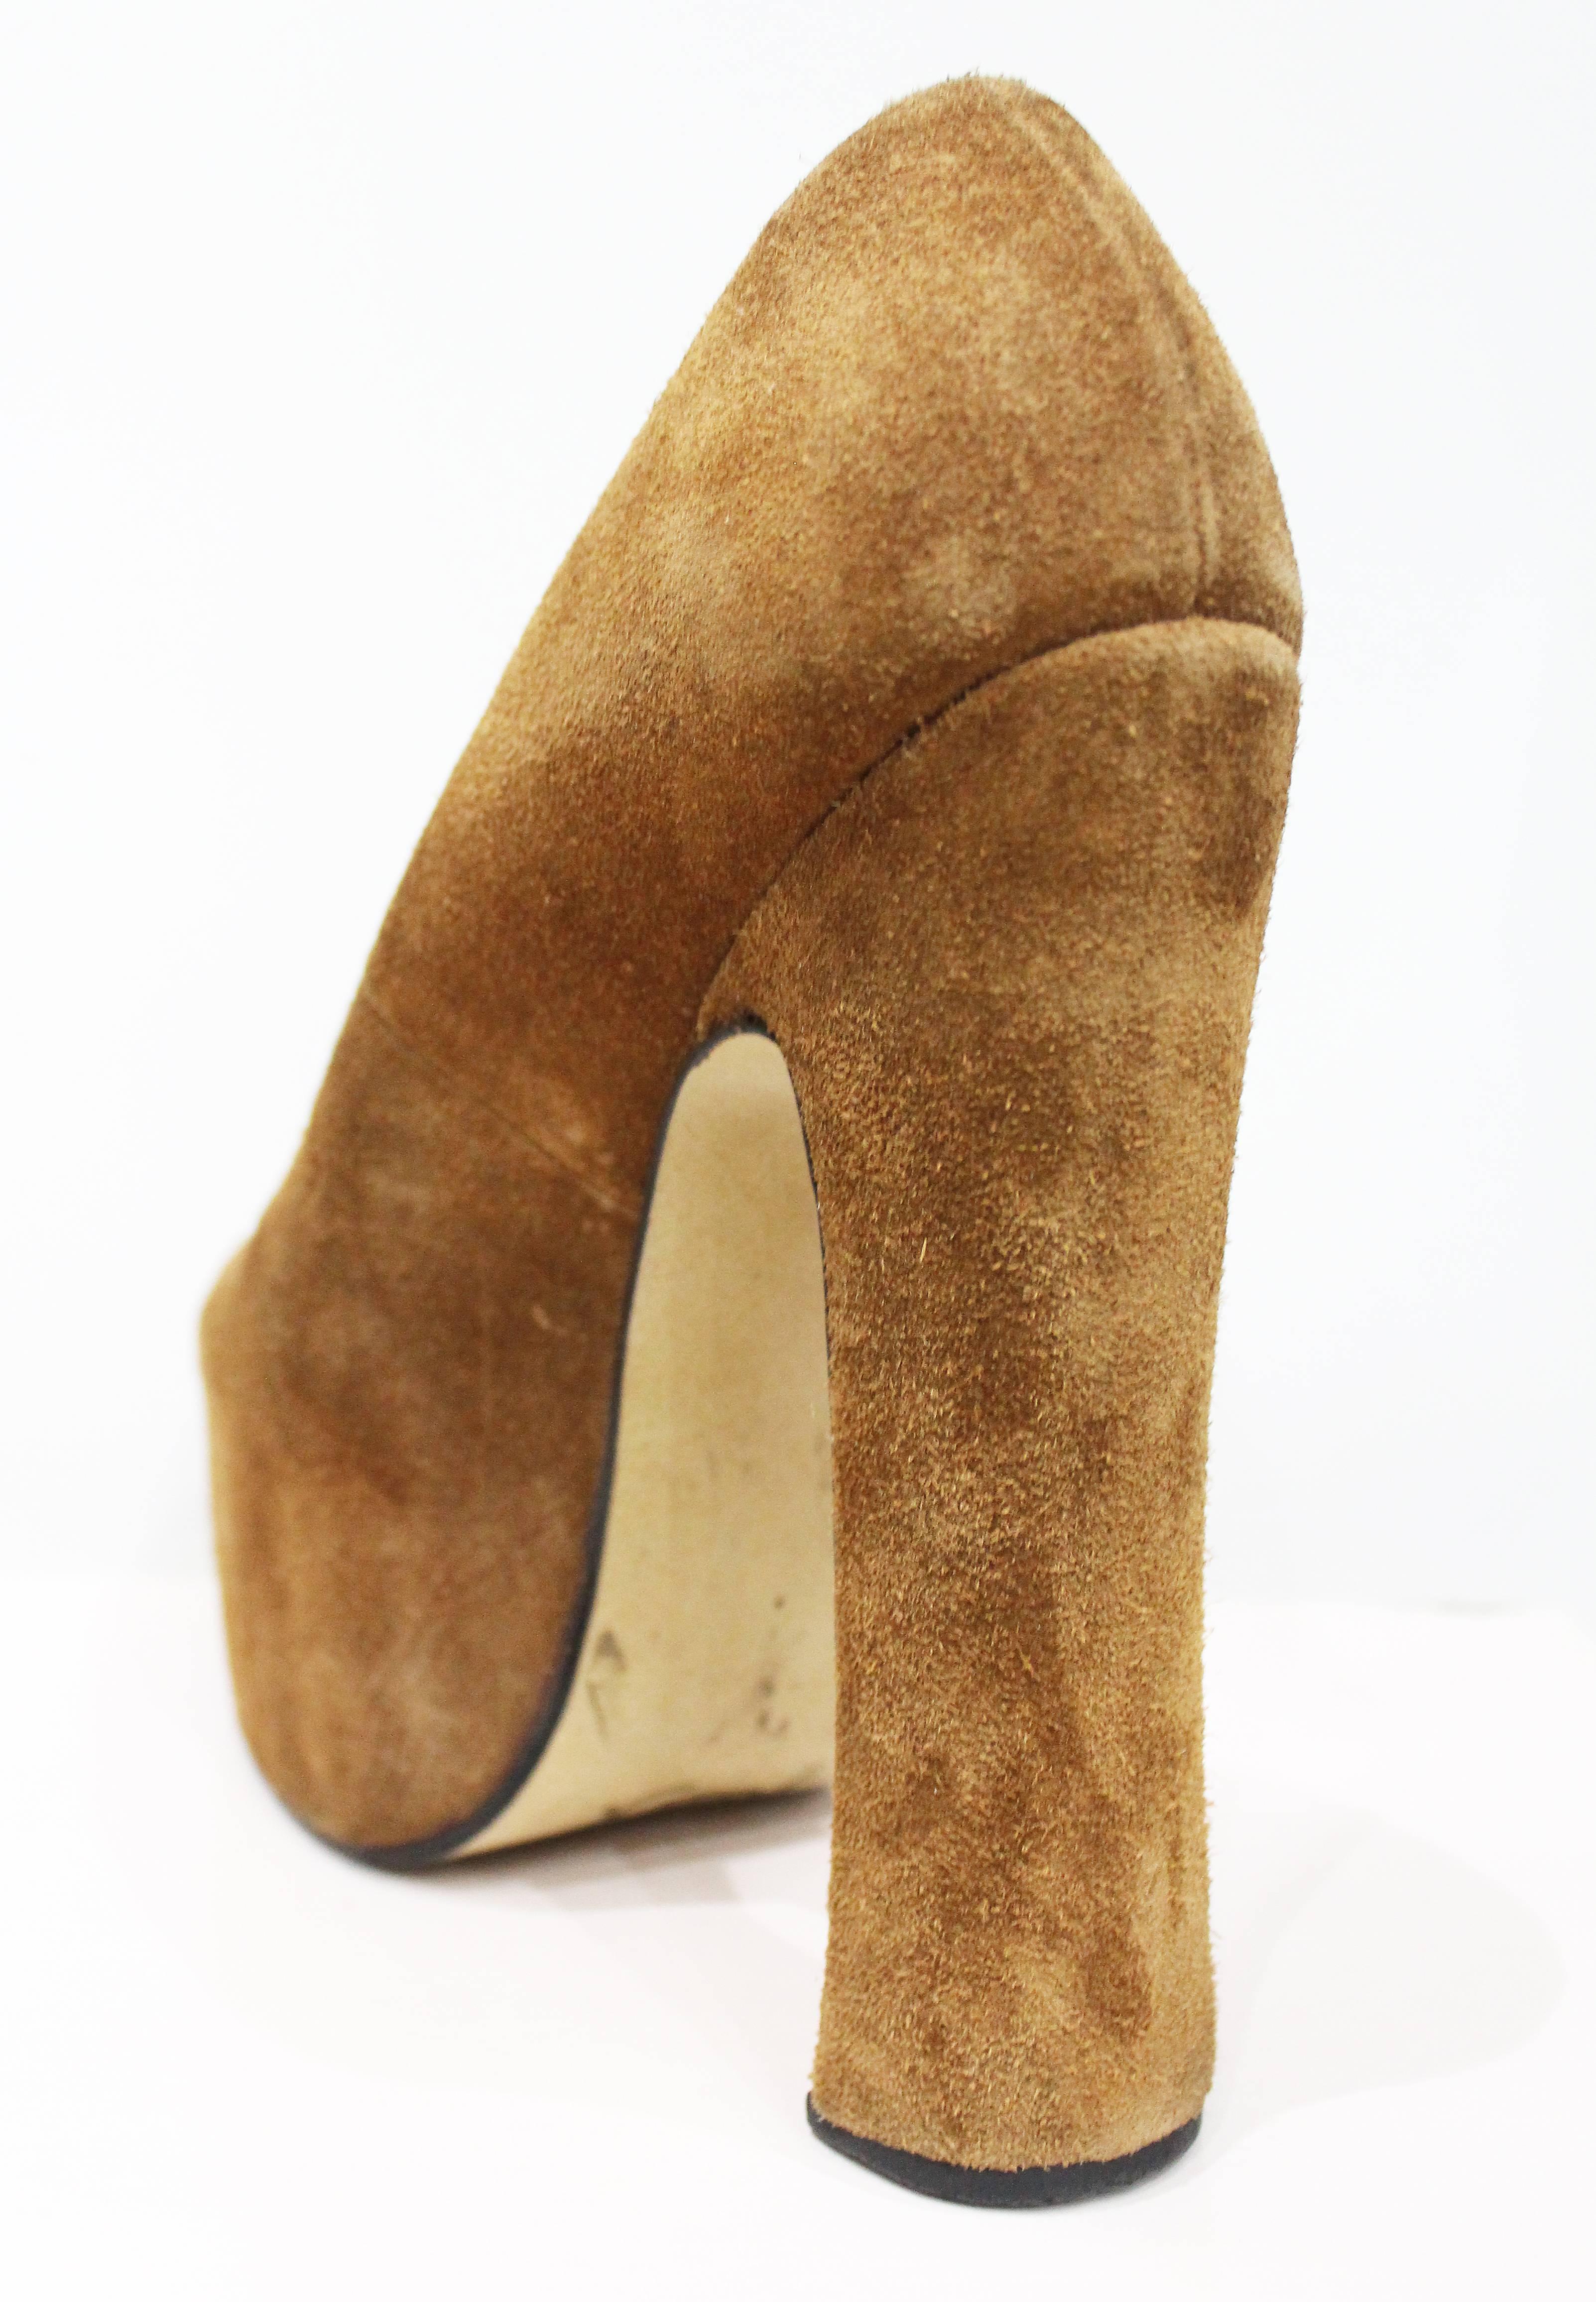 Women's Iconic and rare 1990s Vivienne Westwood suede platforms, Sz 39